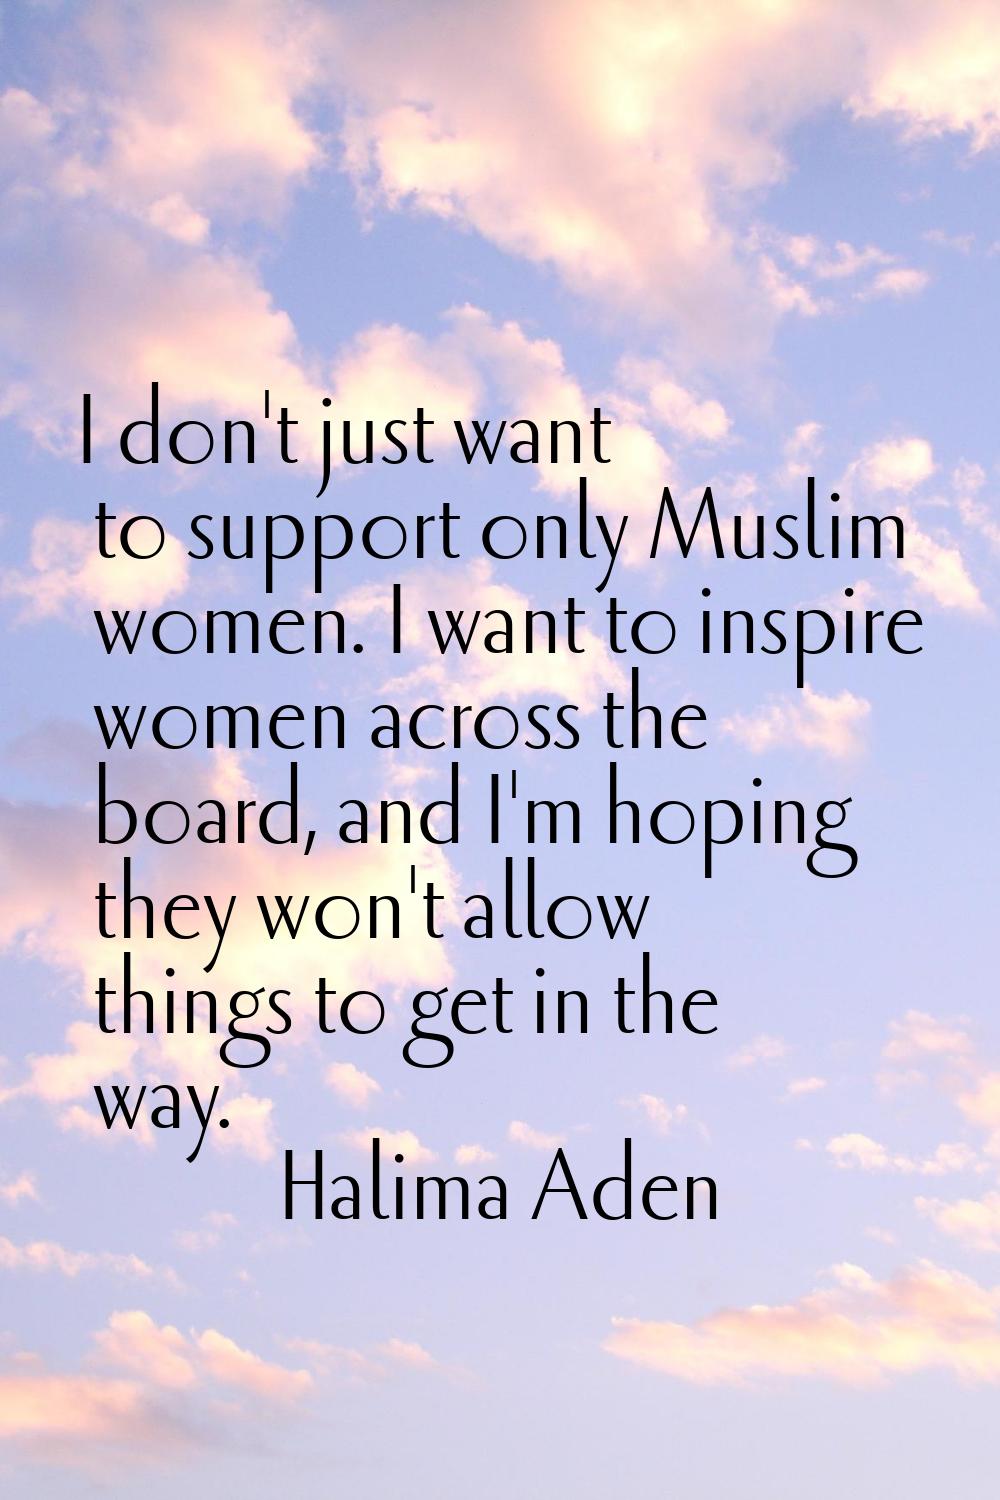 I don't just want to support only Muslim women. I want to inspire women across the board, and I'm h